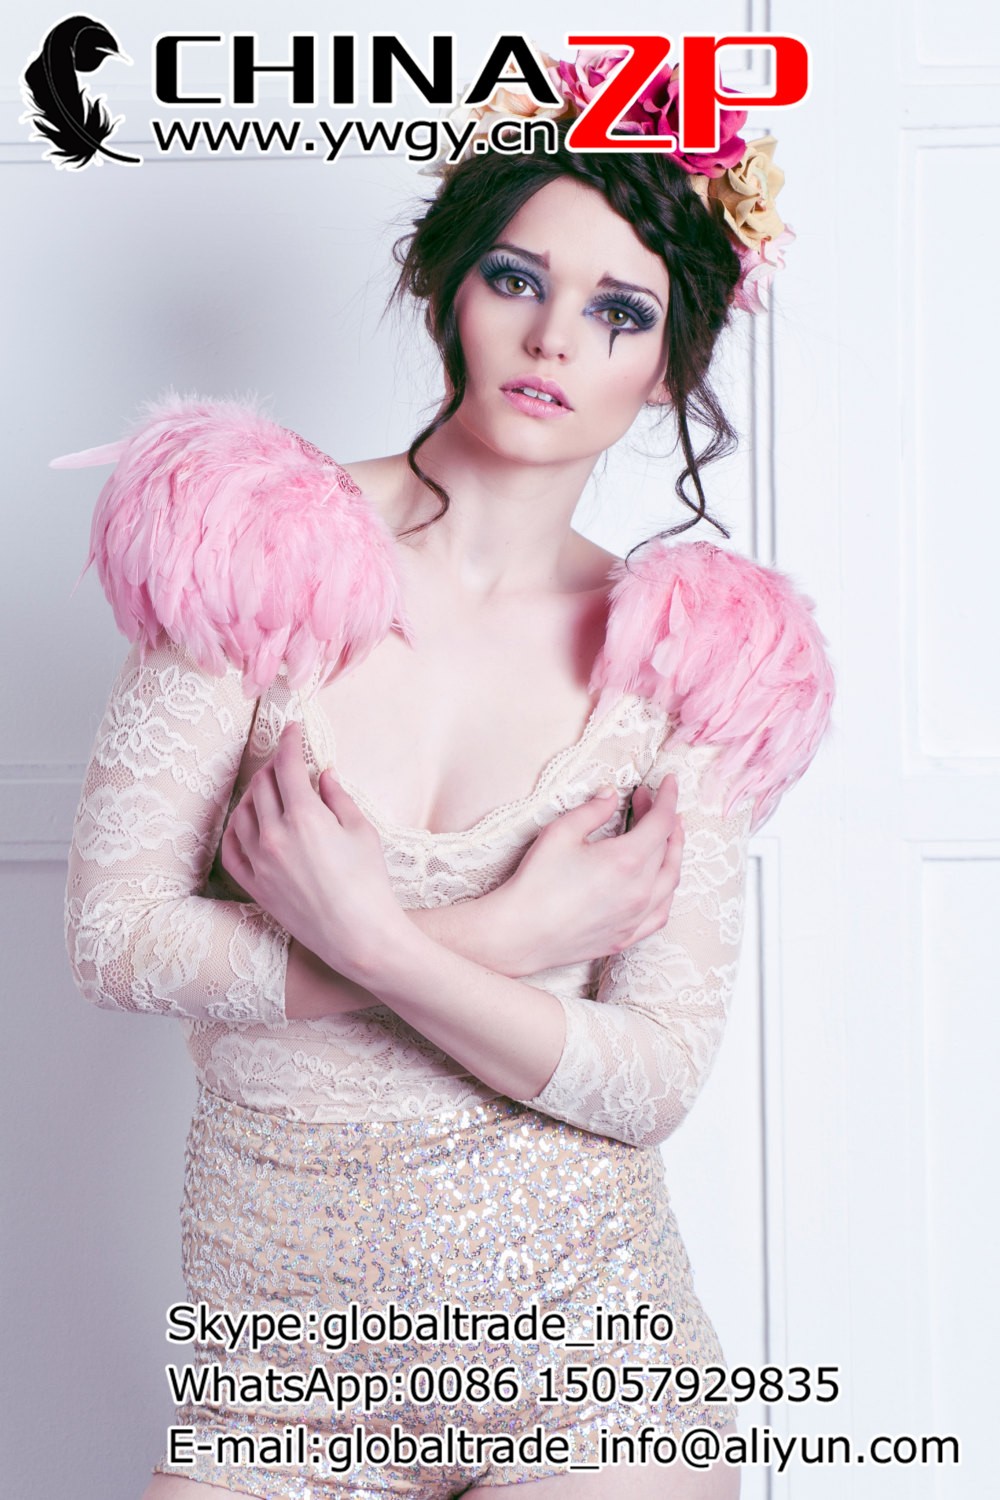 The shoulder pads are made of pink rooster feather trim with a soft felt lining2